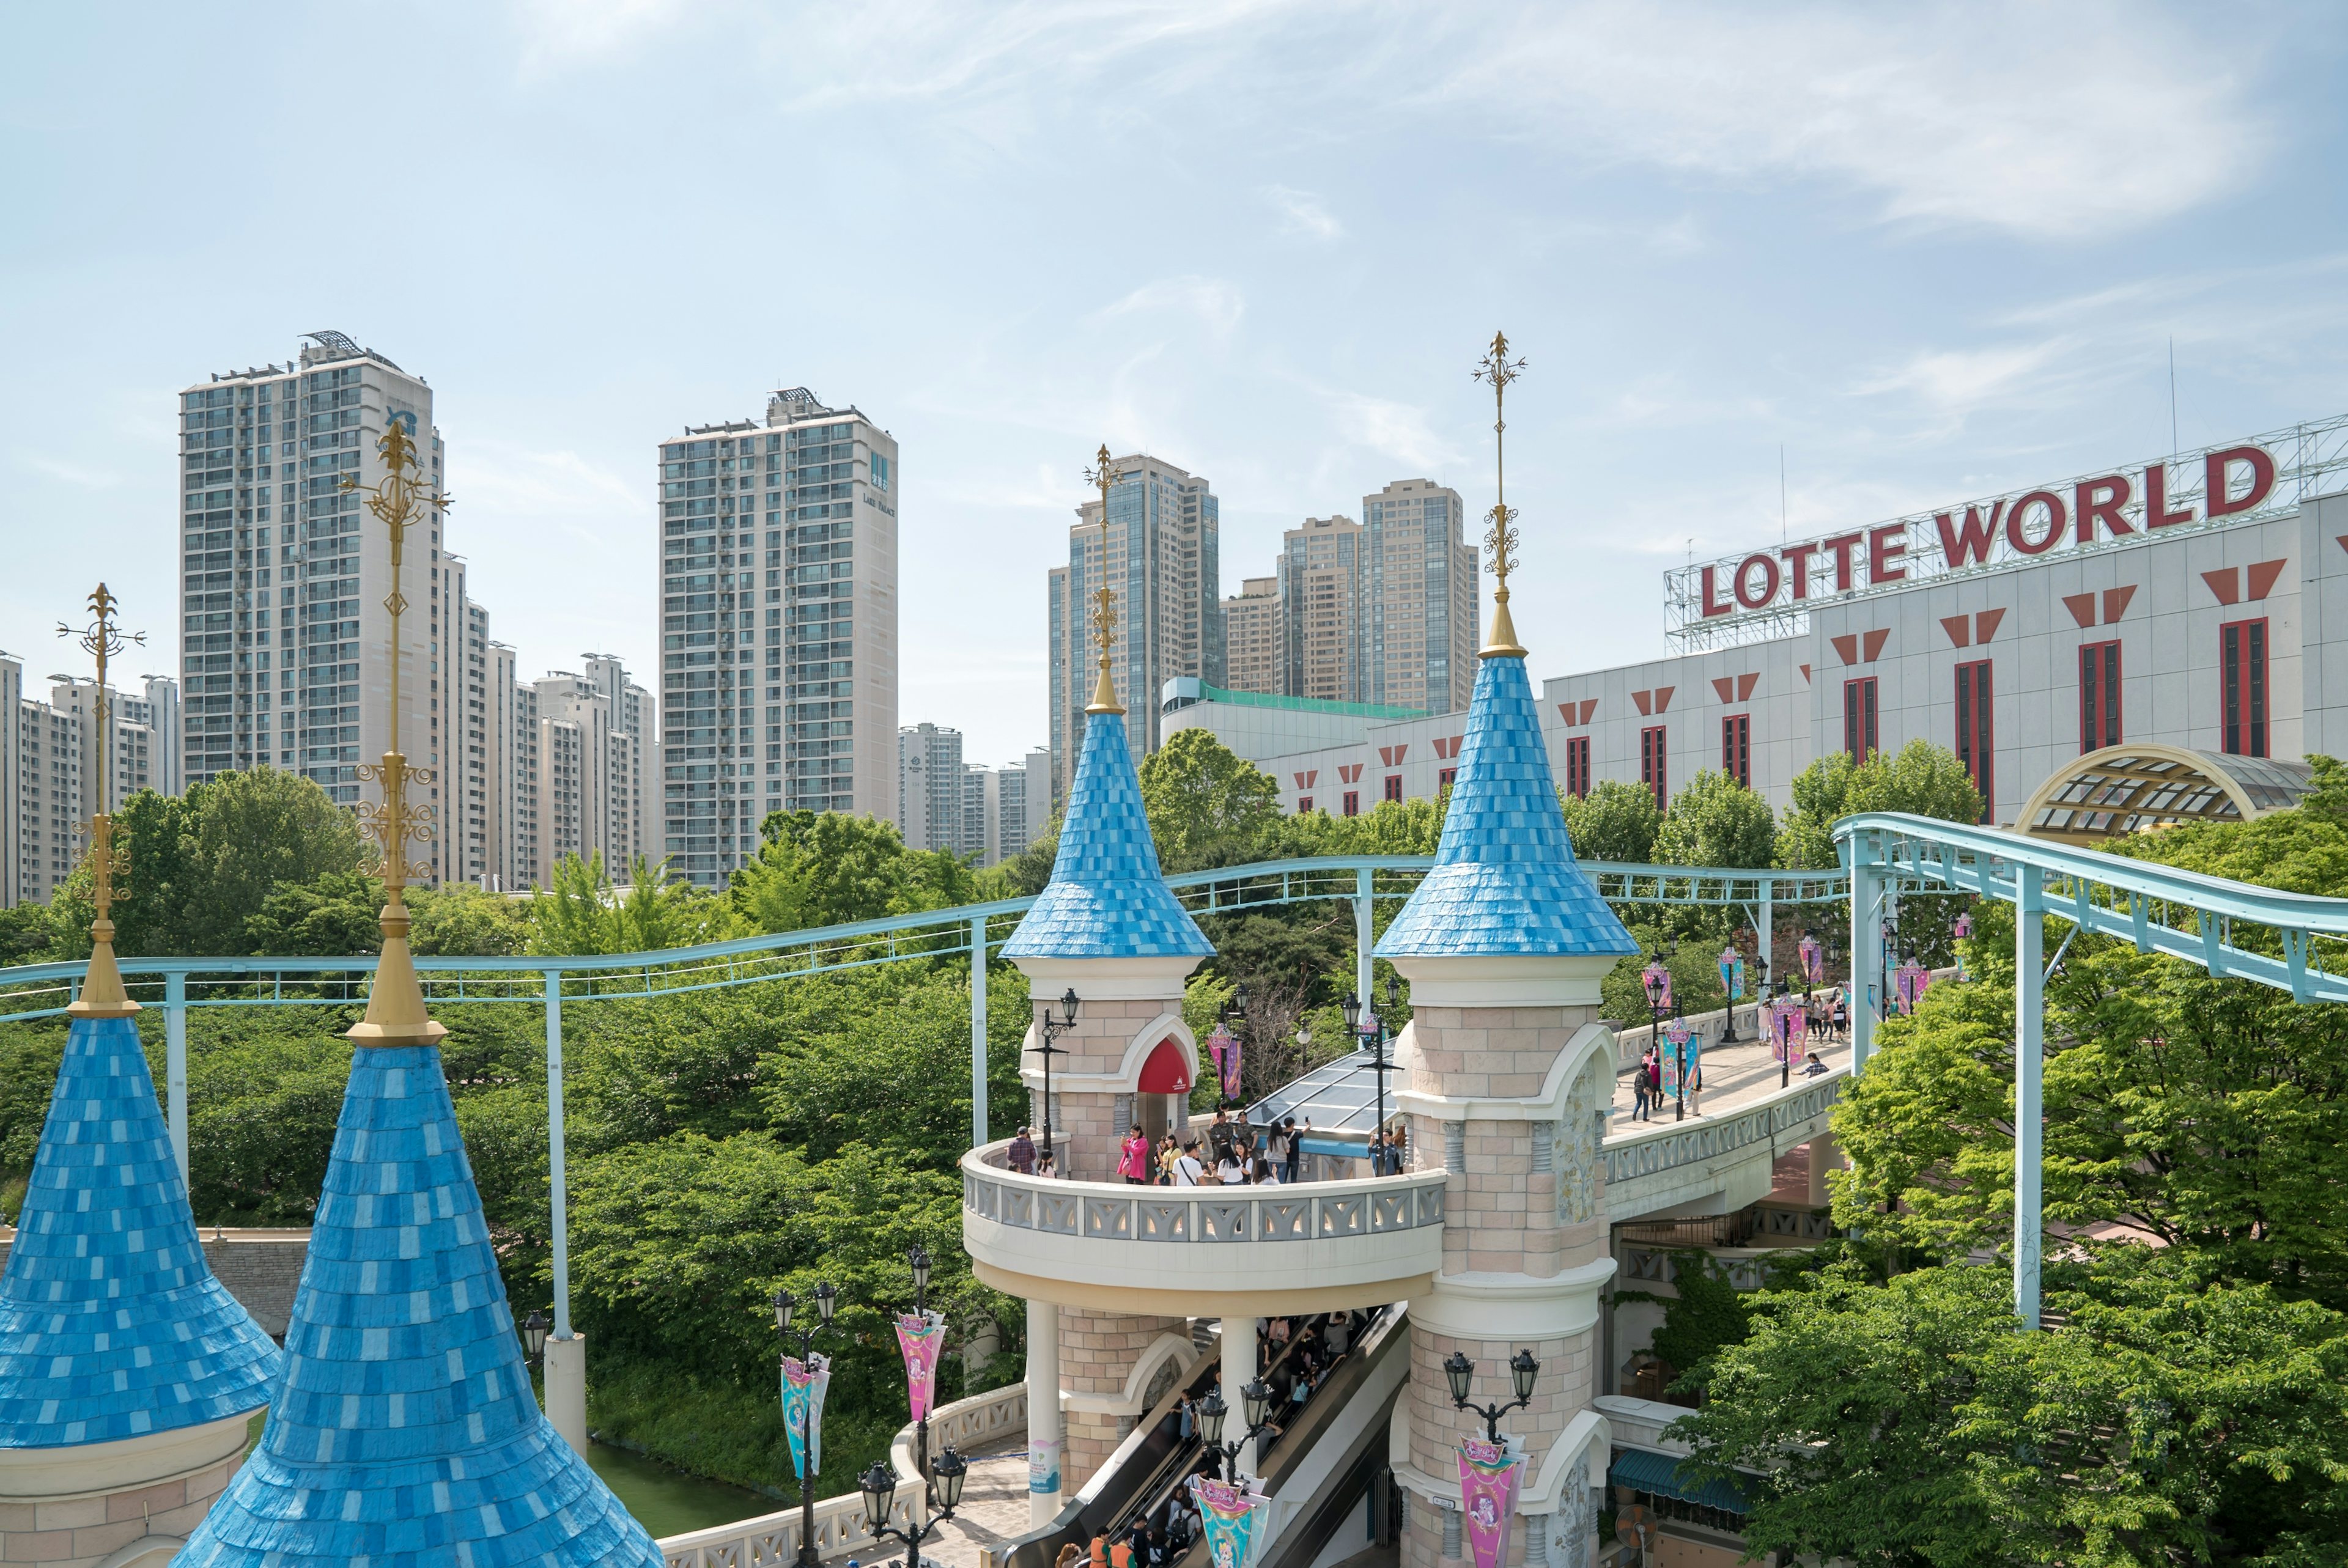 Lotte World in Seoul is one of Lotte's many businesses popular among Chinese tourists in South Korea. (MEzairi/Shutterstock)